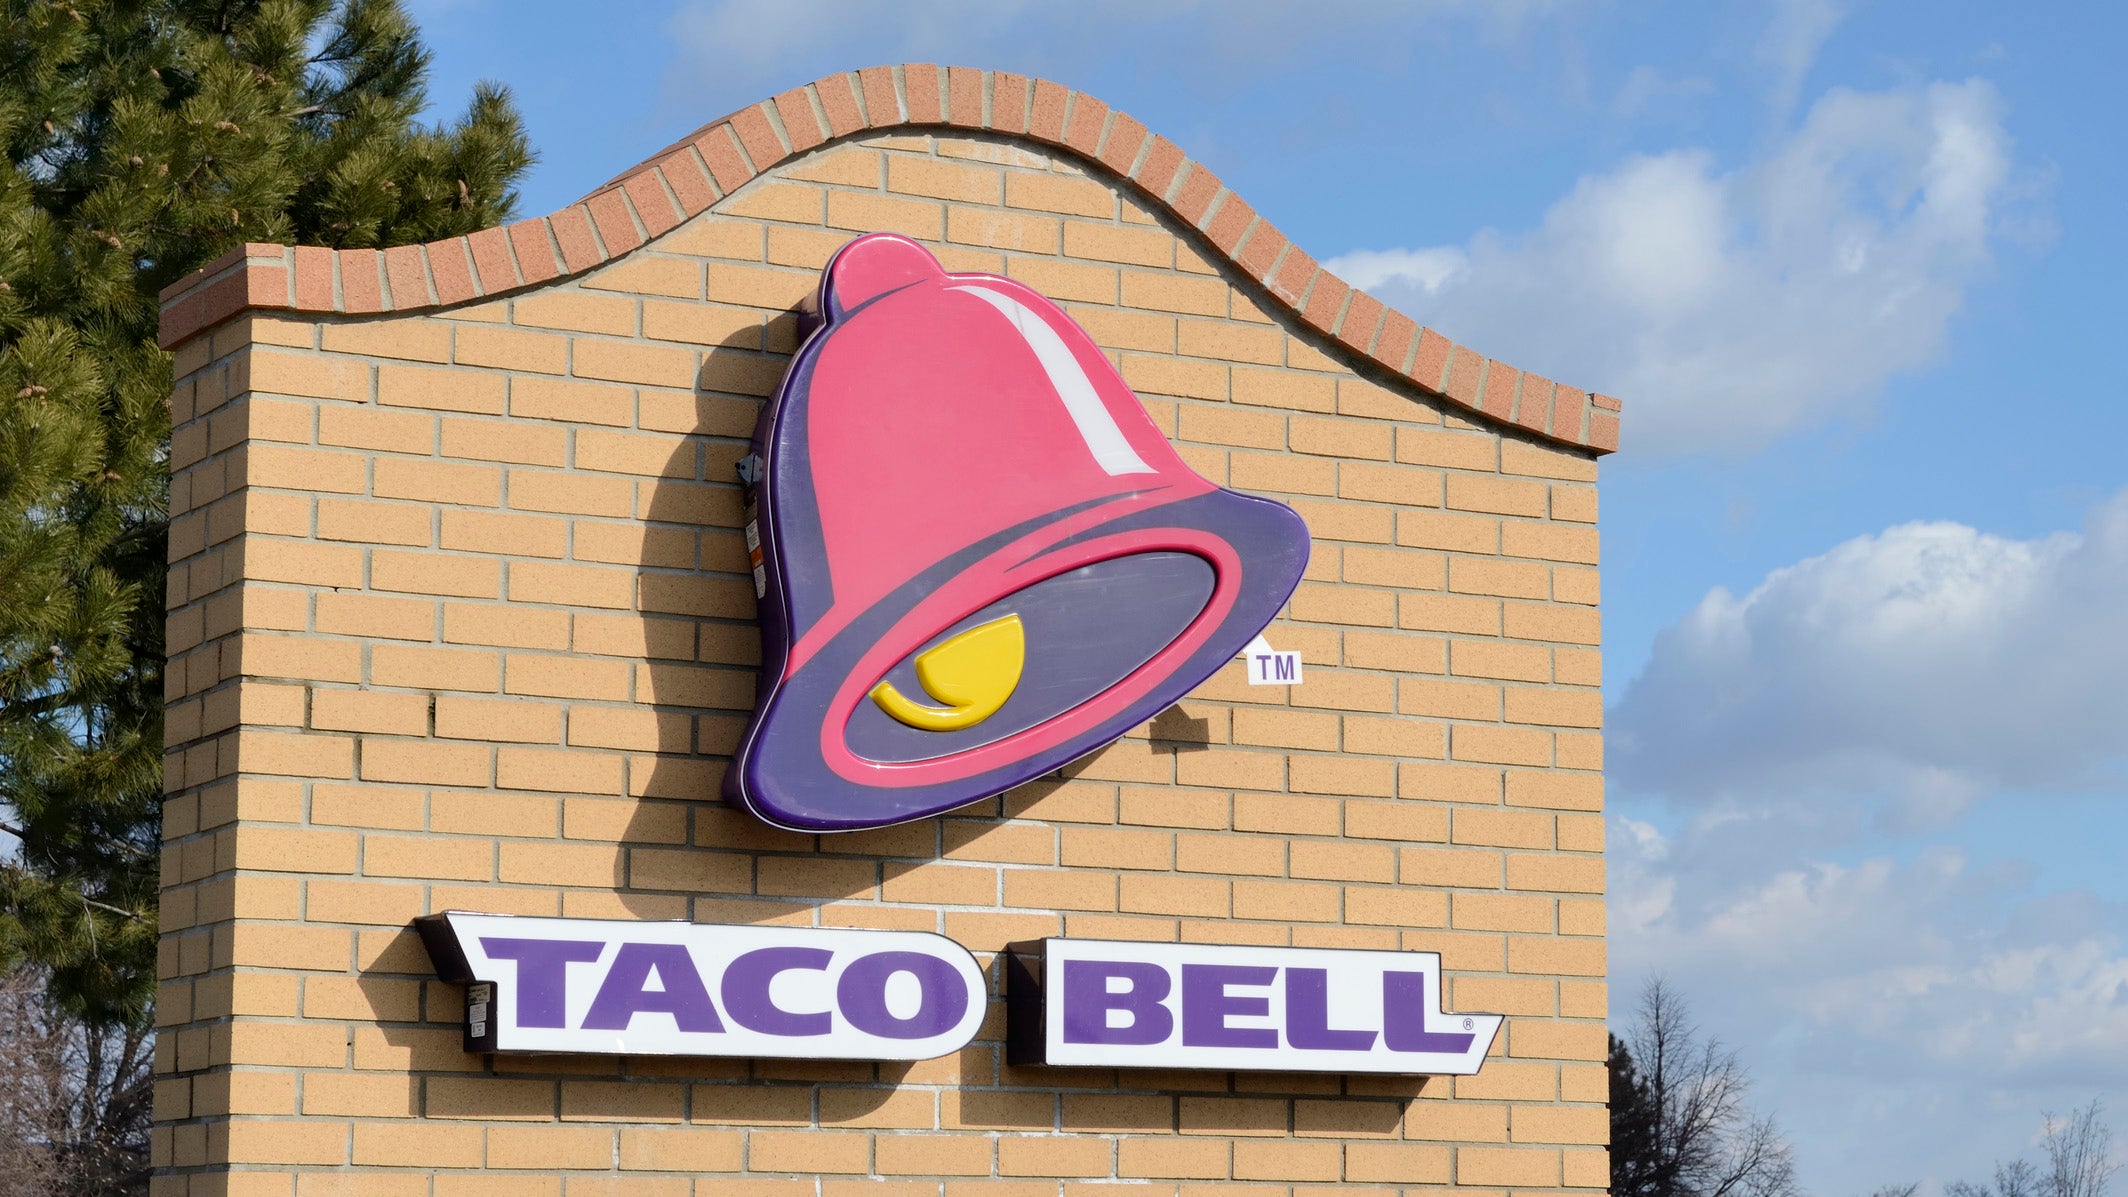 Taco Bell customer says damp cigarette was found in her food